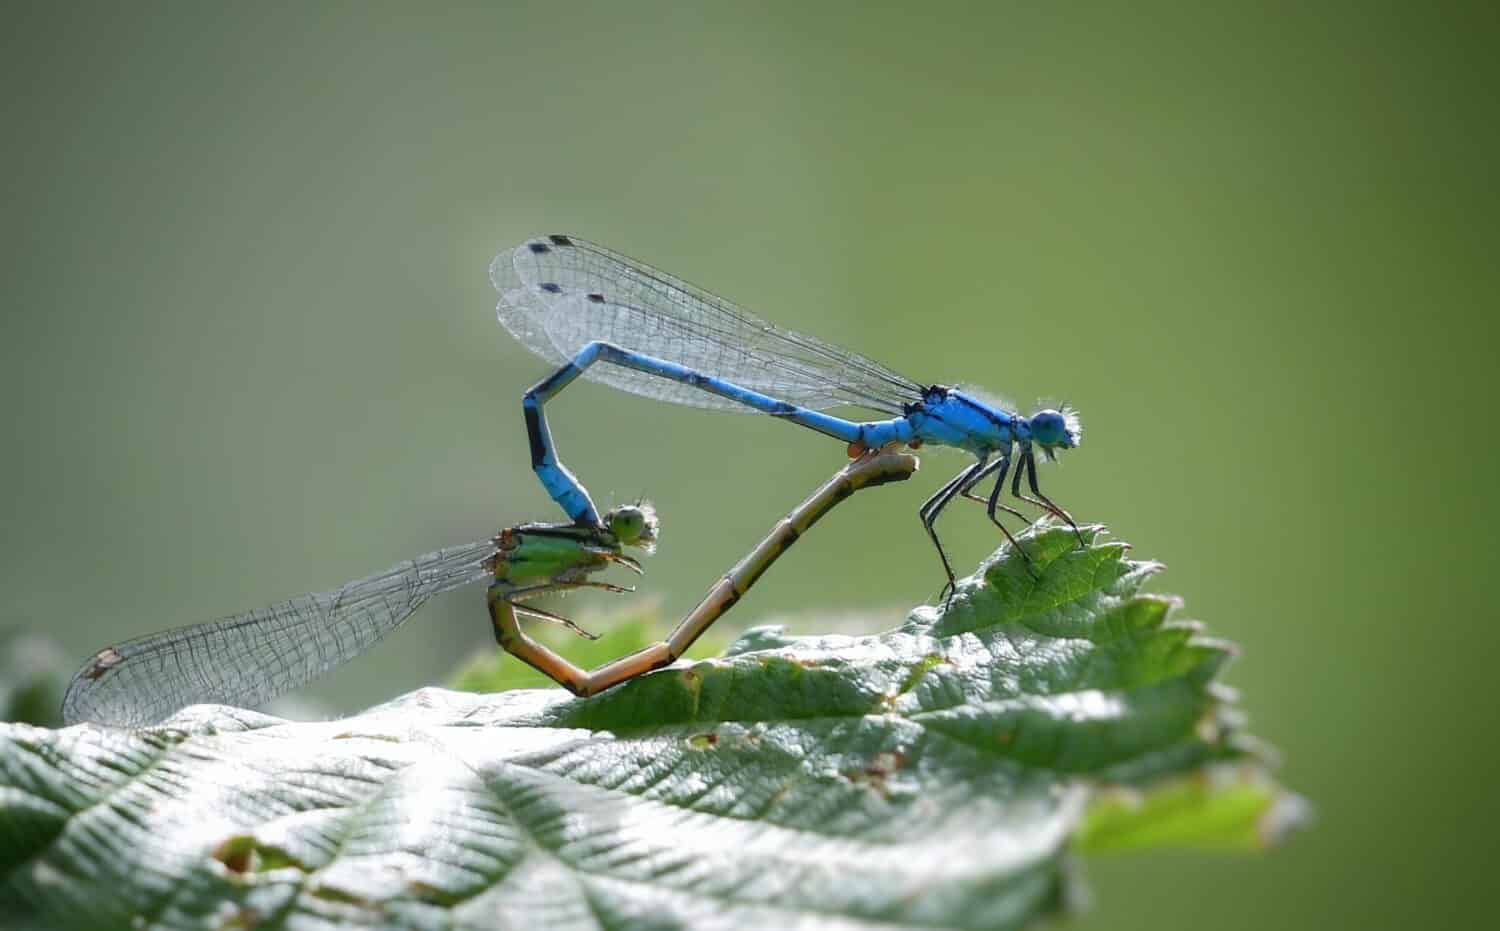 On a green leaf two blue dragonflies are located for the purpose of self sufficiency for procreation